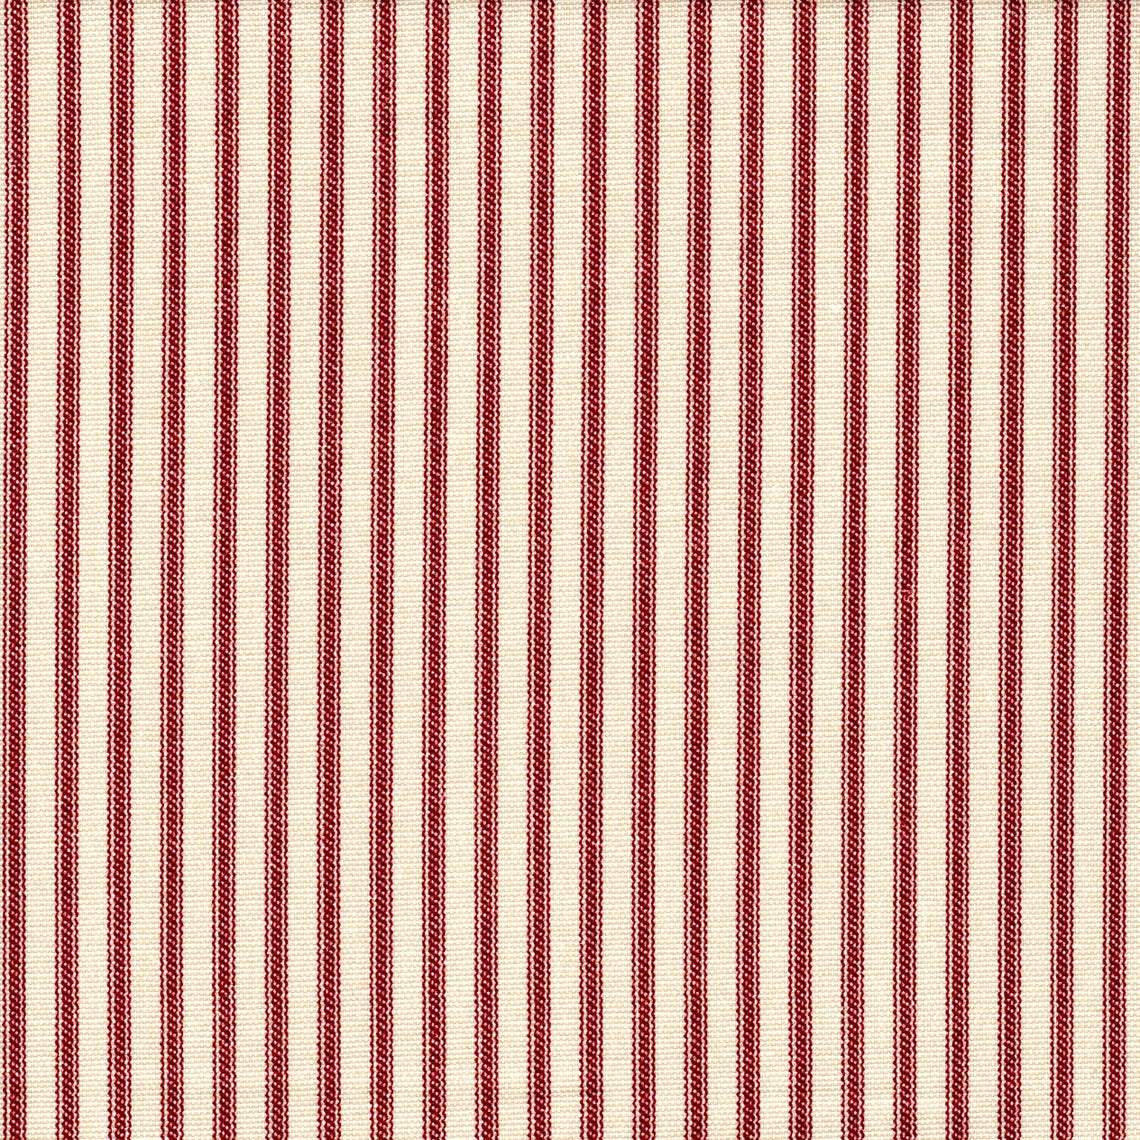 gathered crib skirt in farmhouse red traditional ticking stripe on beige